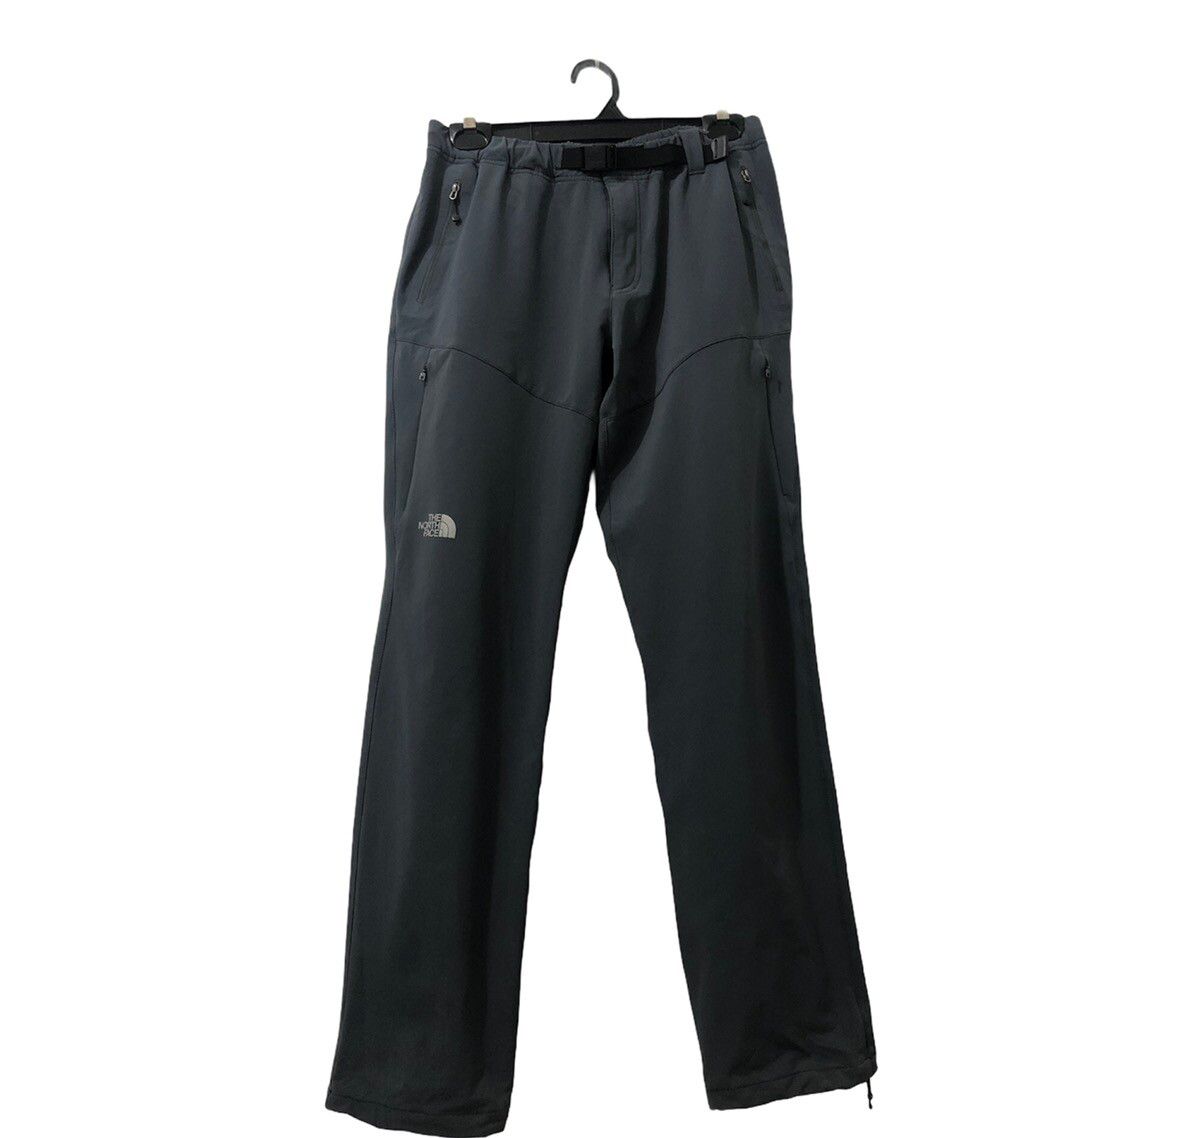 North face NTW57013 casual / hiking pant - 1